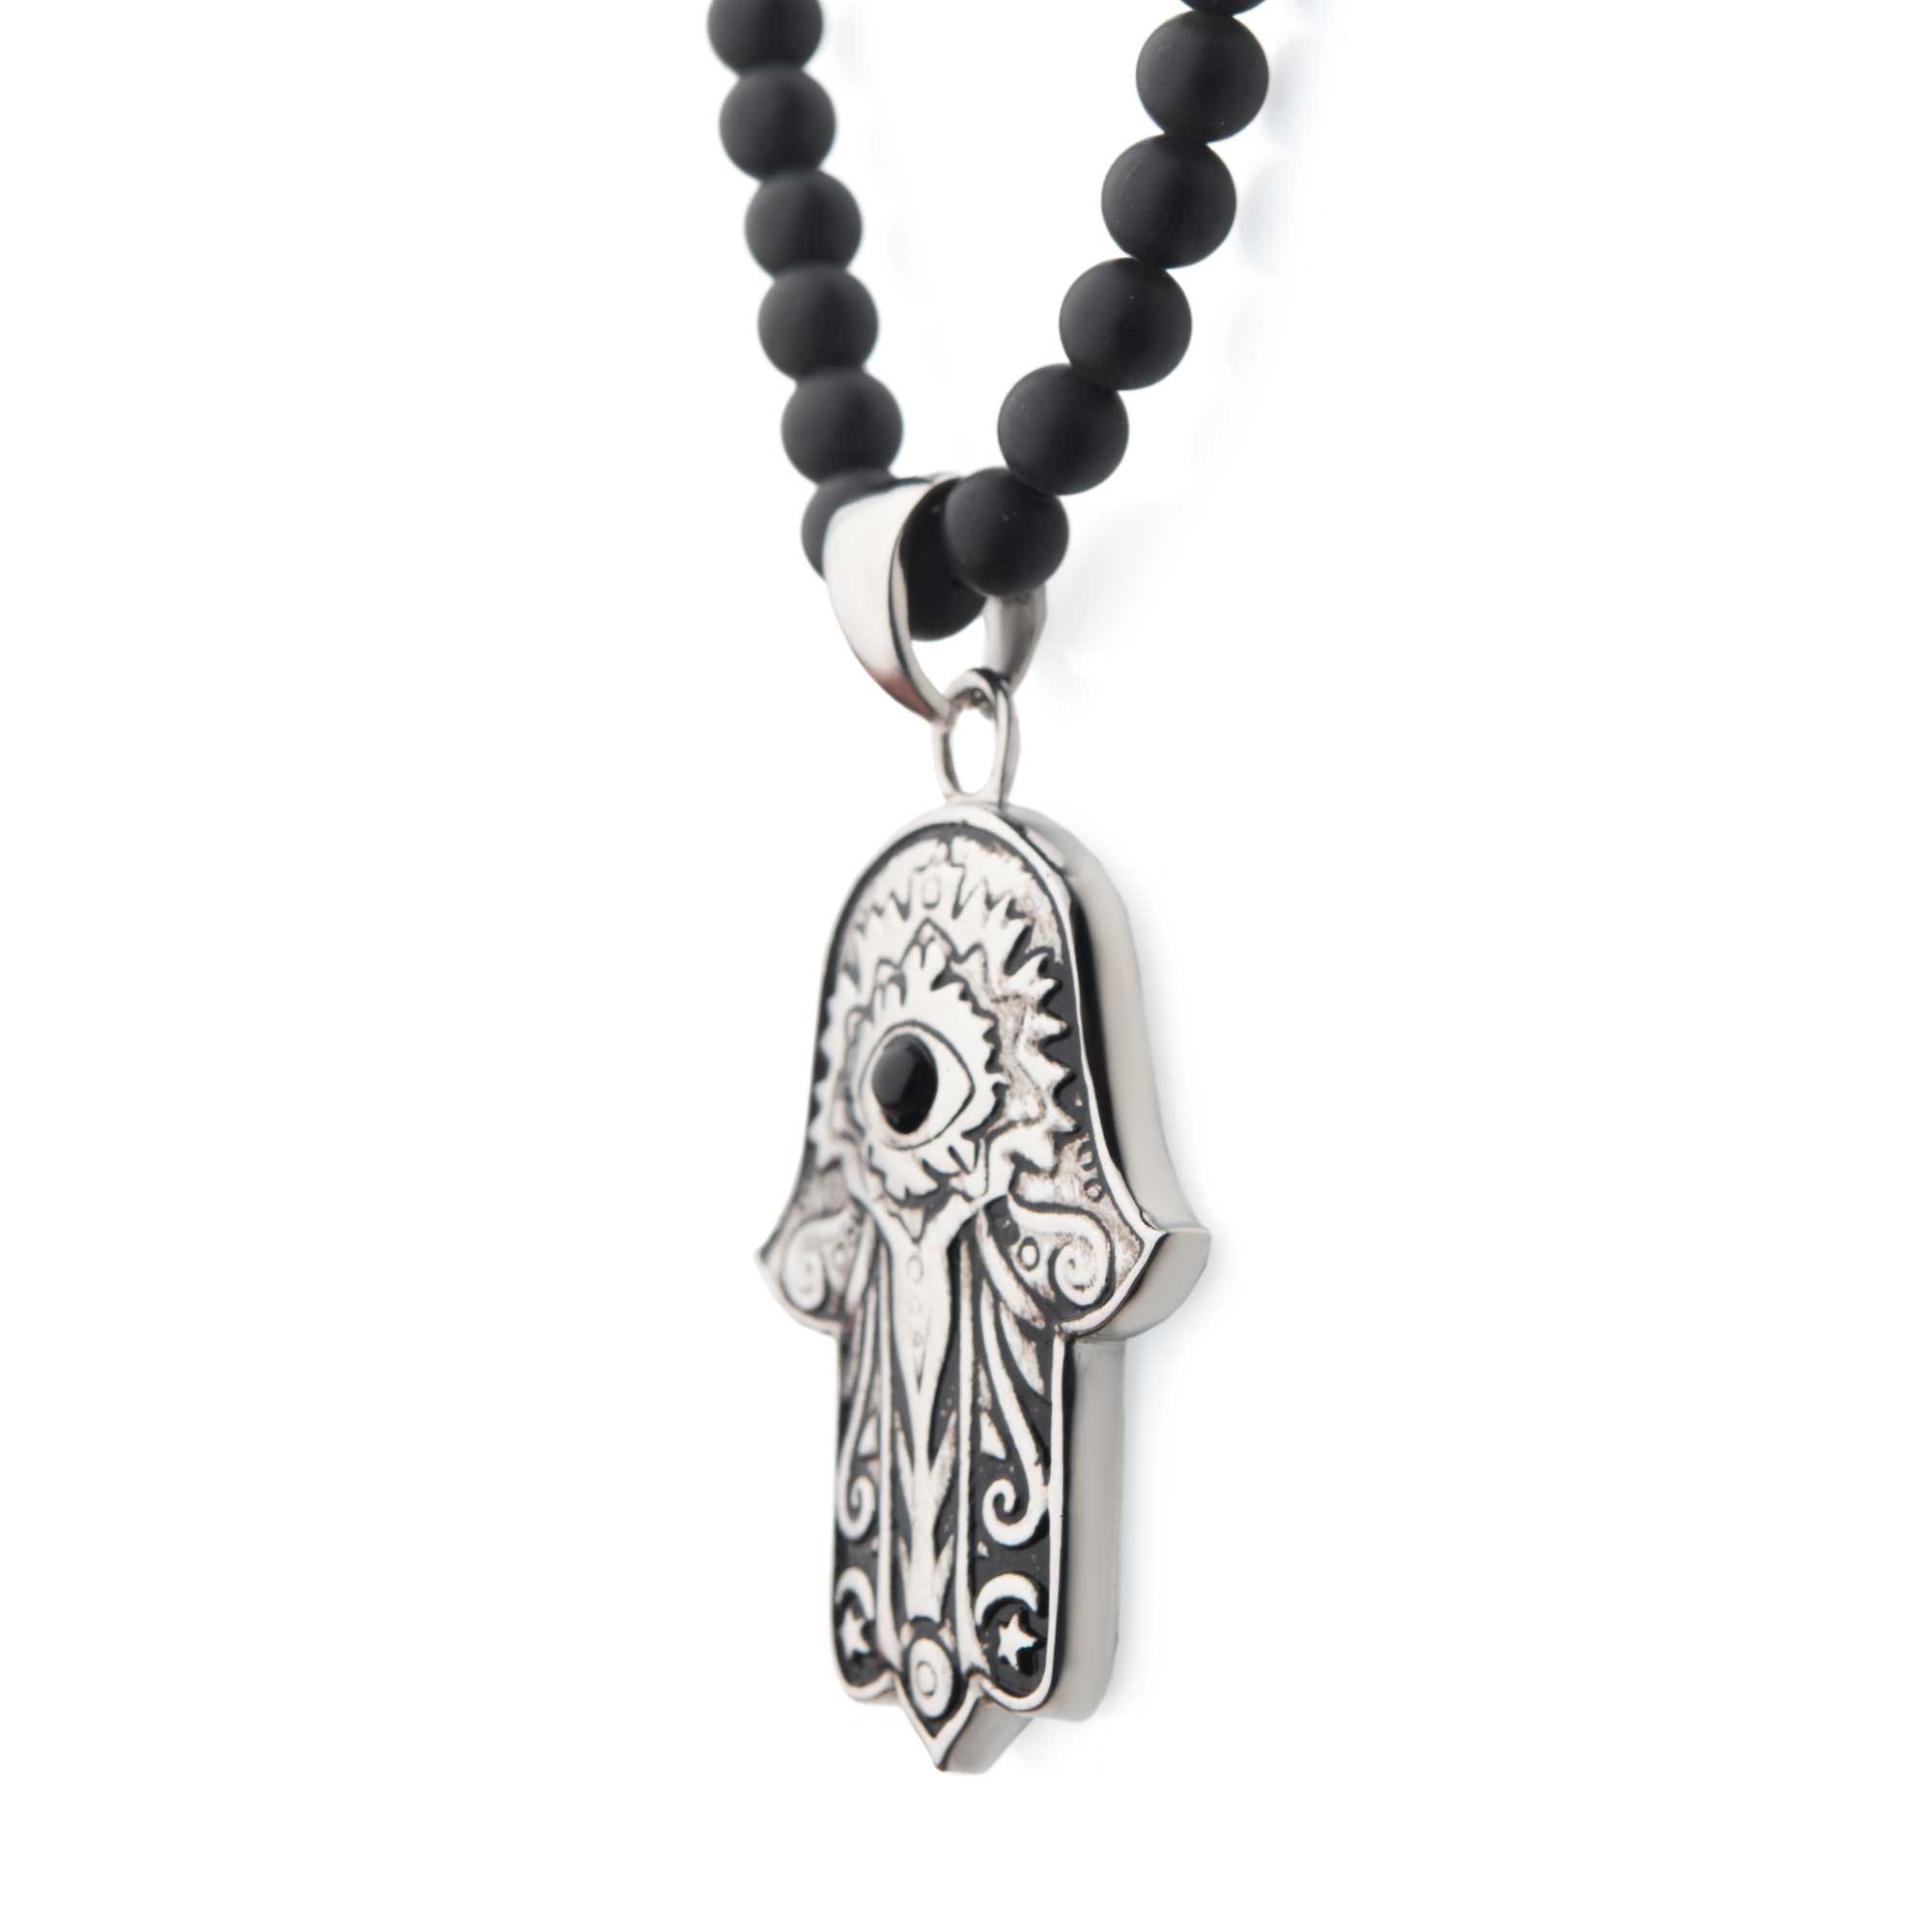 Stainless Steel with Centerpiece Black Agate Stone Hamsa Pendant, with Black Agate Stone Bead Necklace Image 3 Lewis Jewelers, Inc. Ansonia, CT